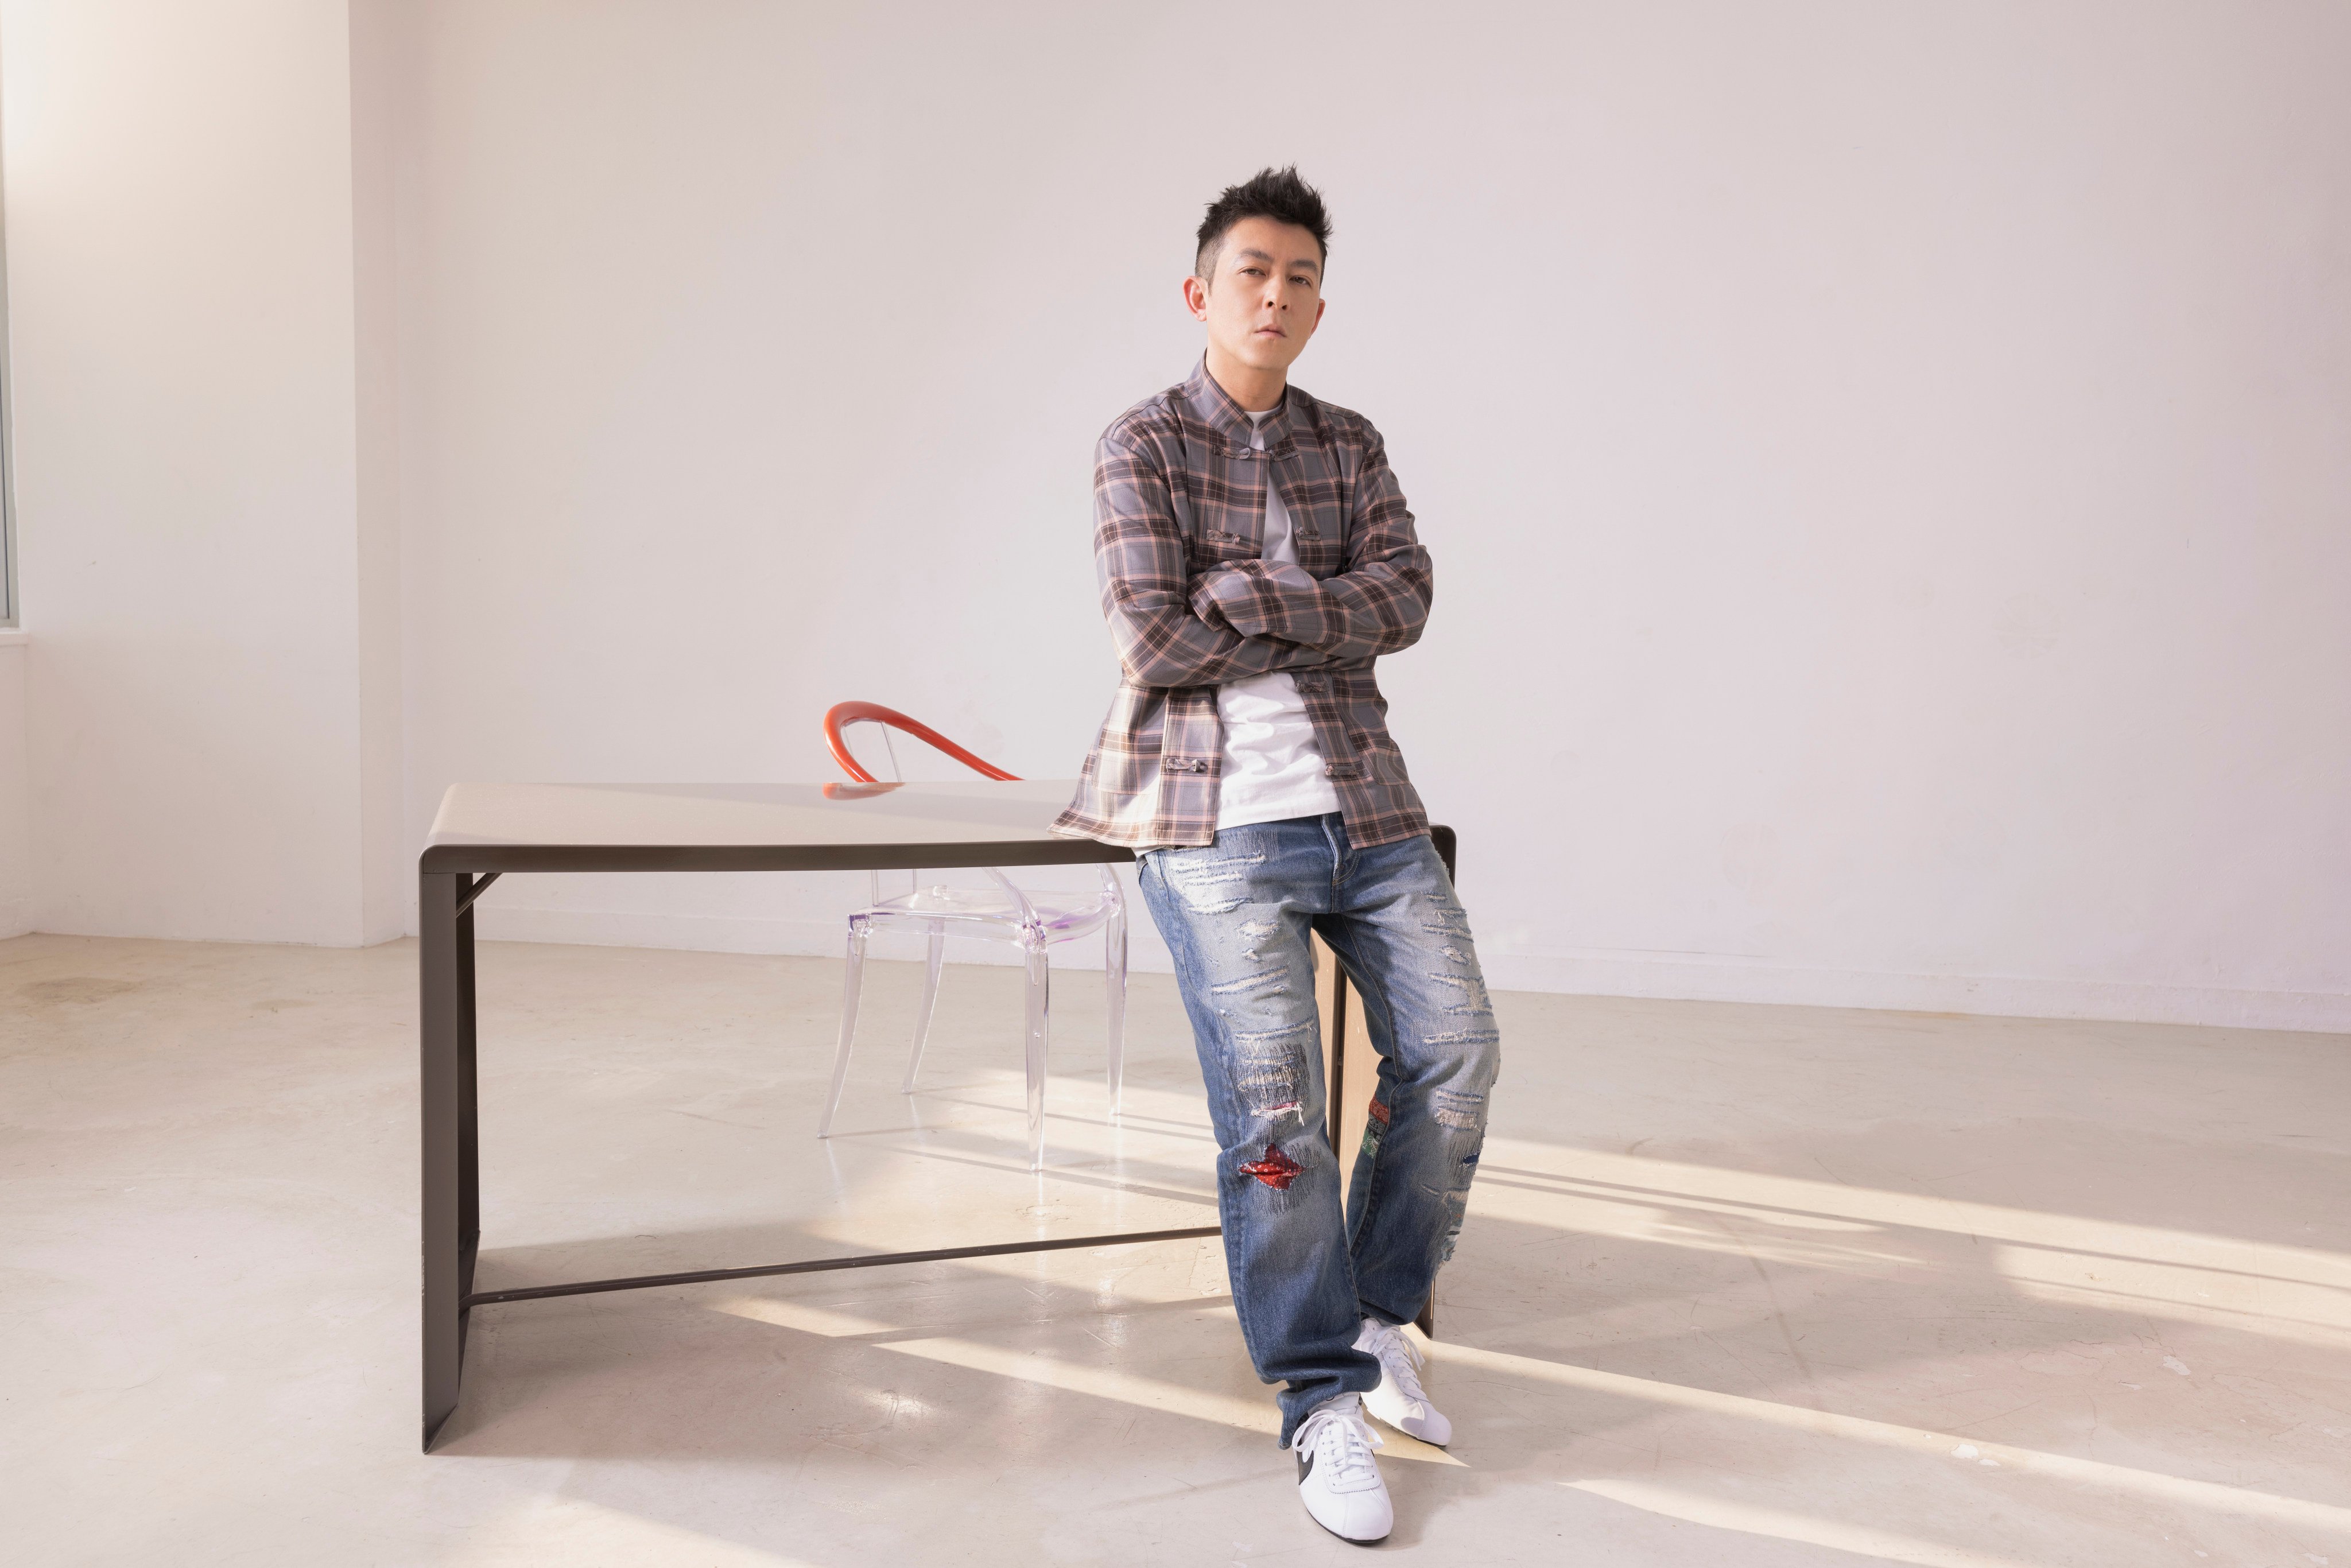 CLOT AND JUICE FOUNDER EDISON CHEN